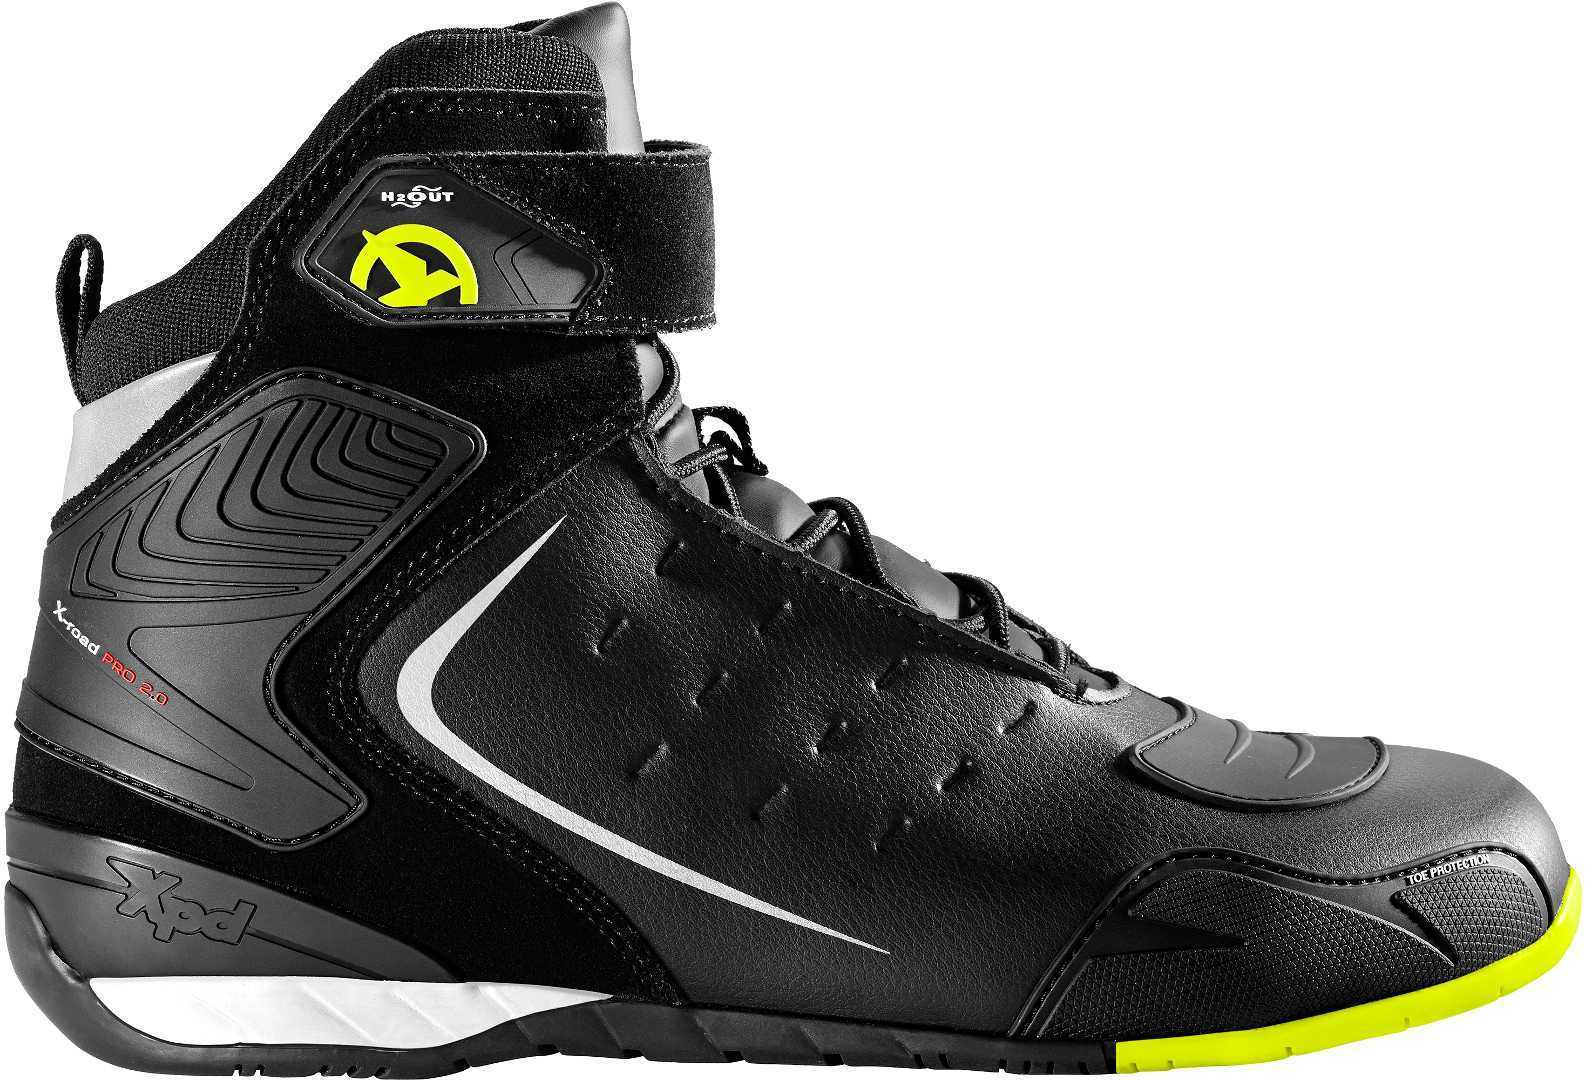 XPD X-Road H2Out Chaussures de moto Jaune taille : 46